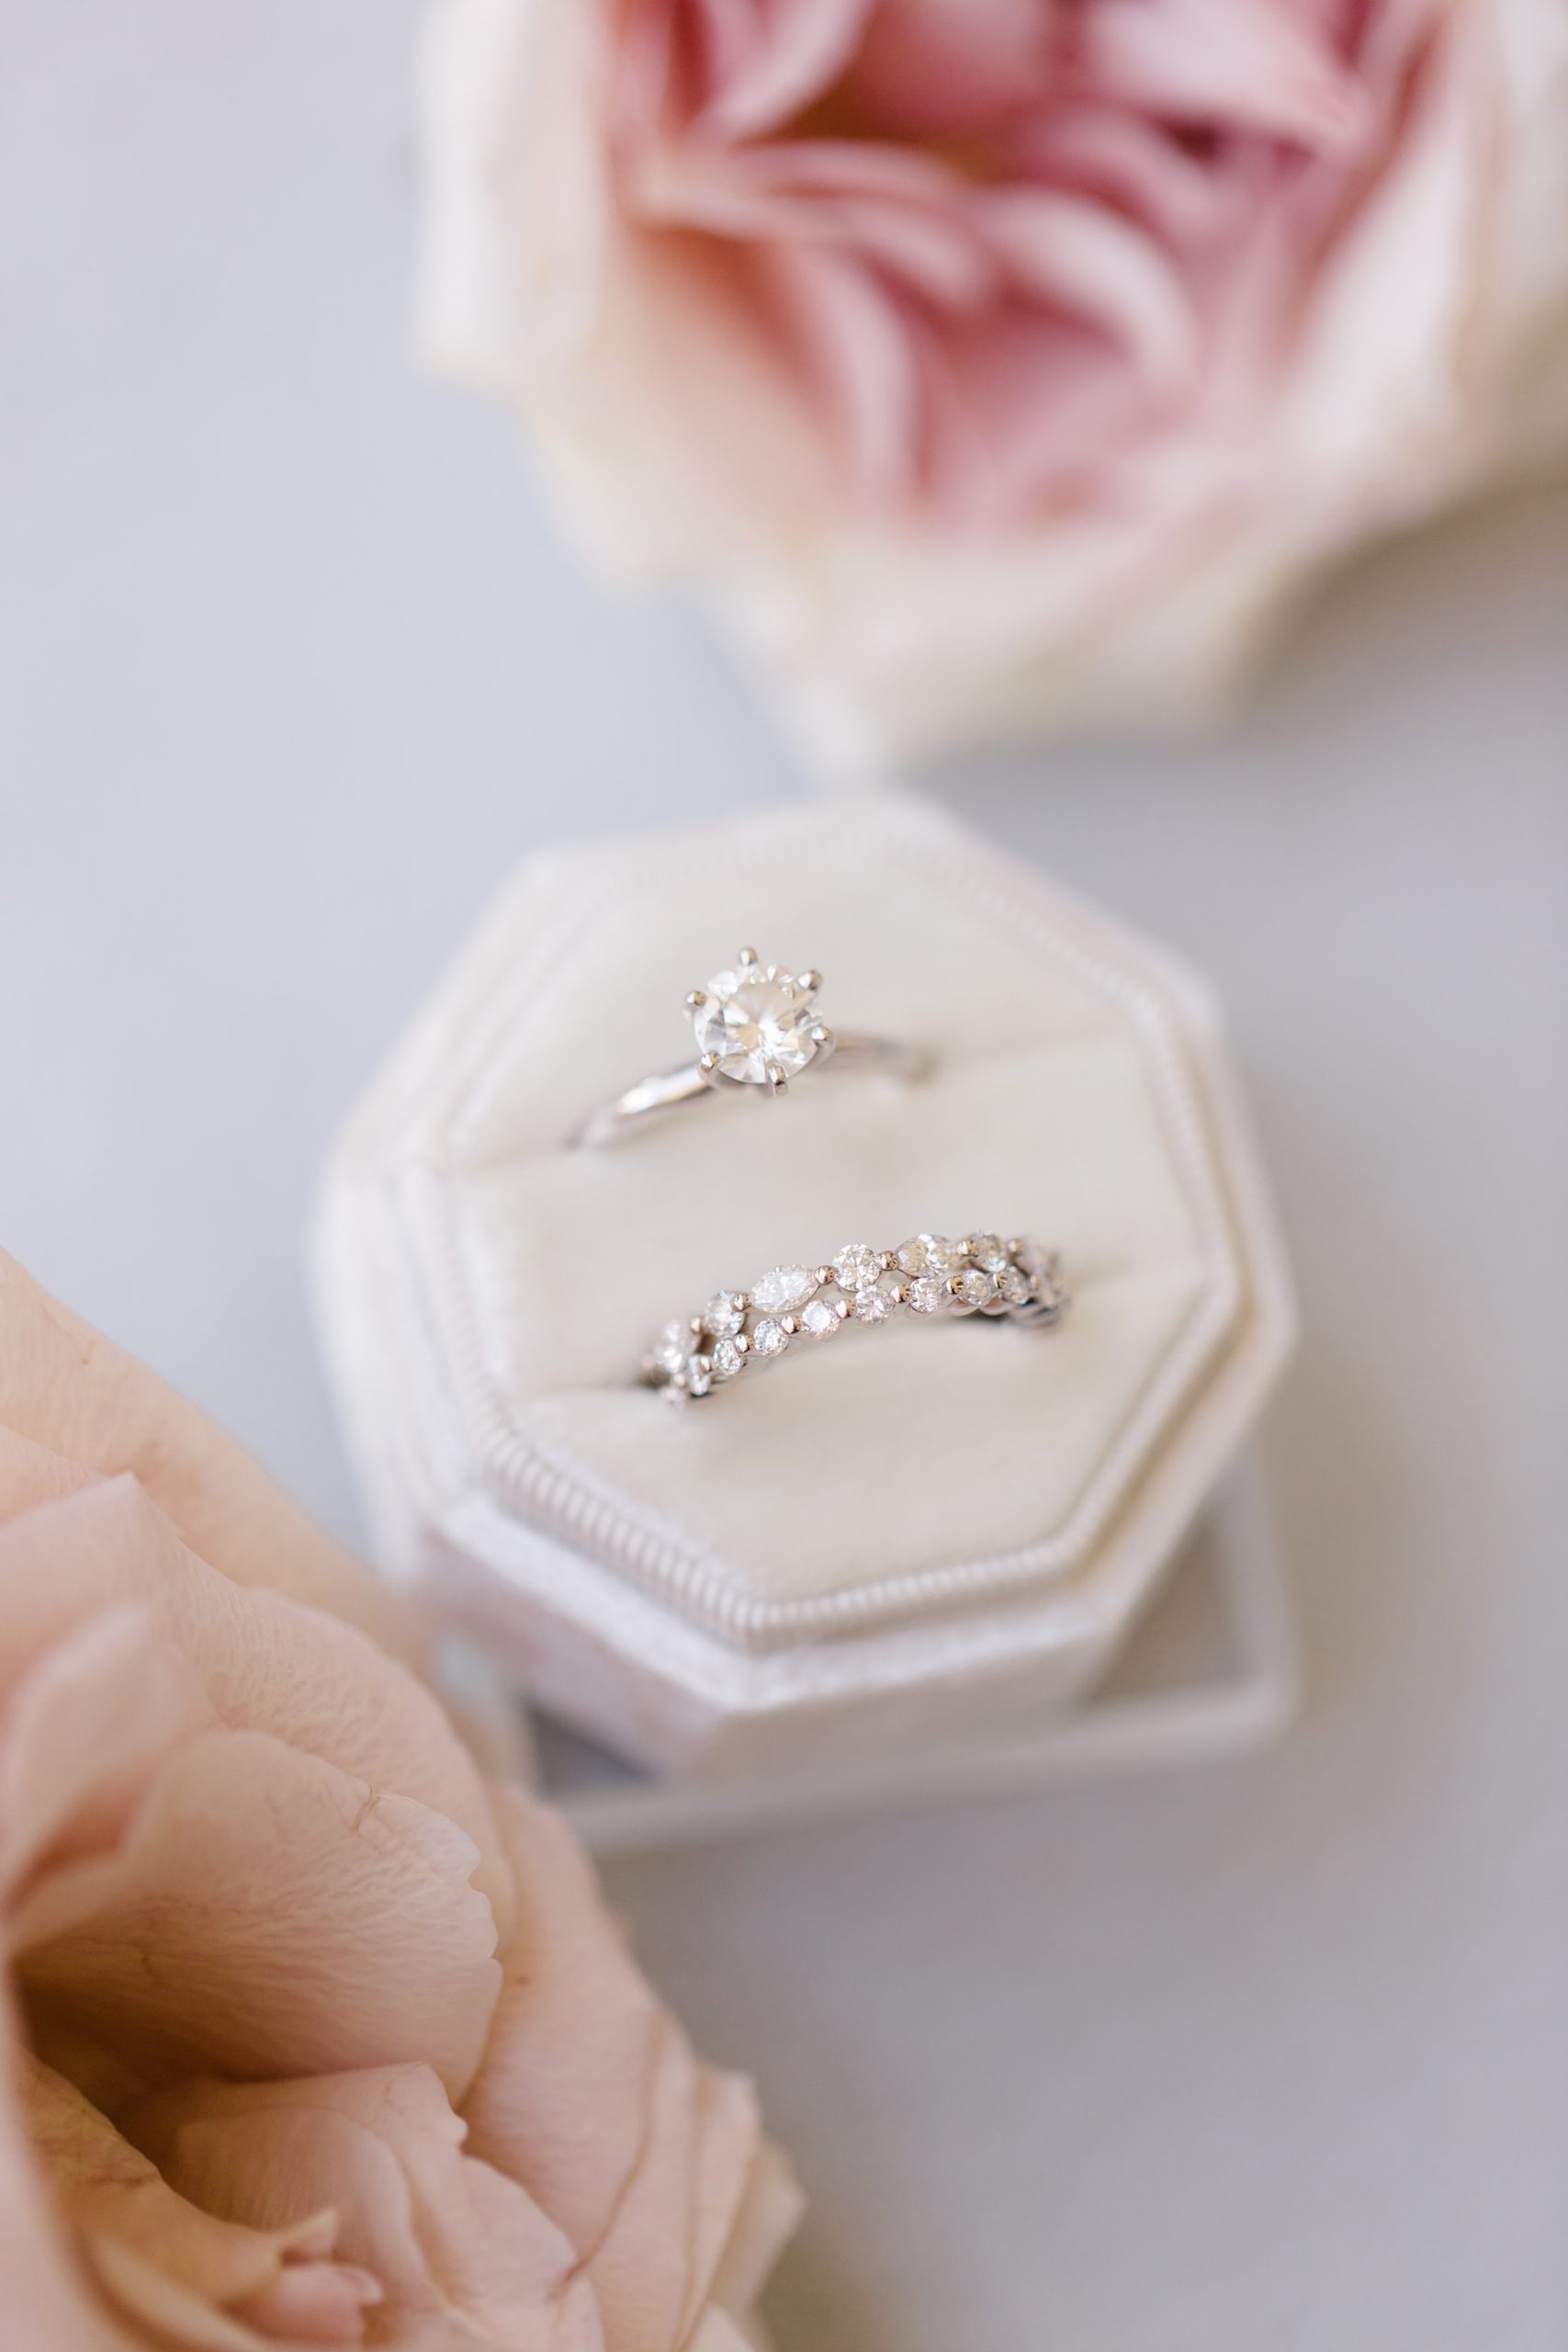 jewelry for Texas bride photographed by Courtney Bosworth Photography